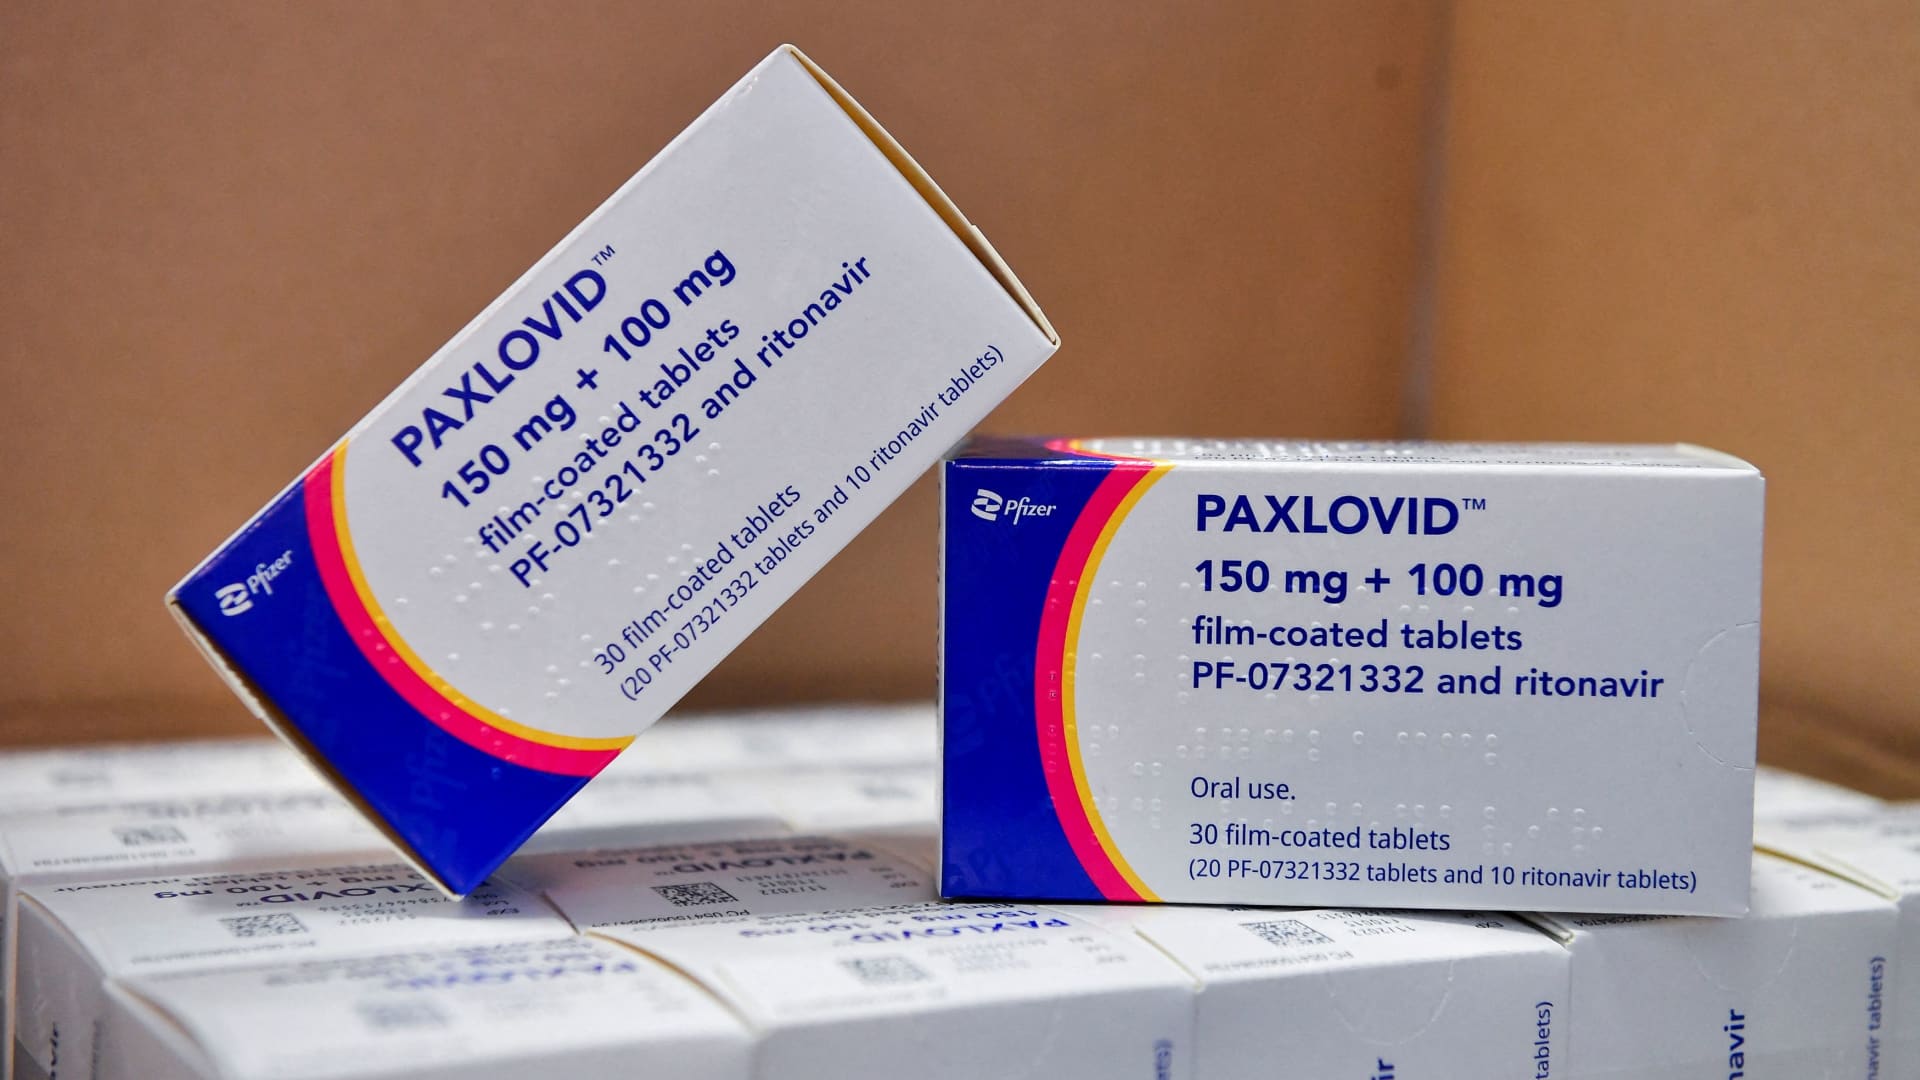 FDA grants full approval to Pfizer Covid treatment Paxlovid for high-risk adults - CNBC (Picture 1)